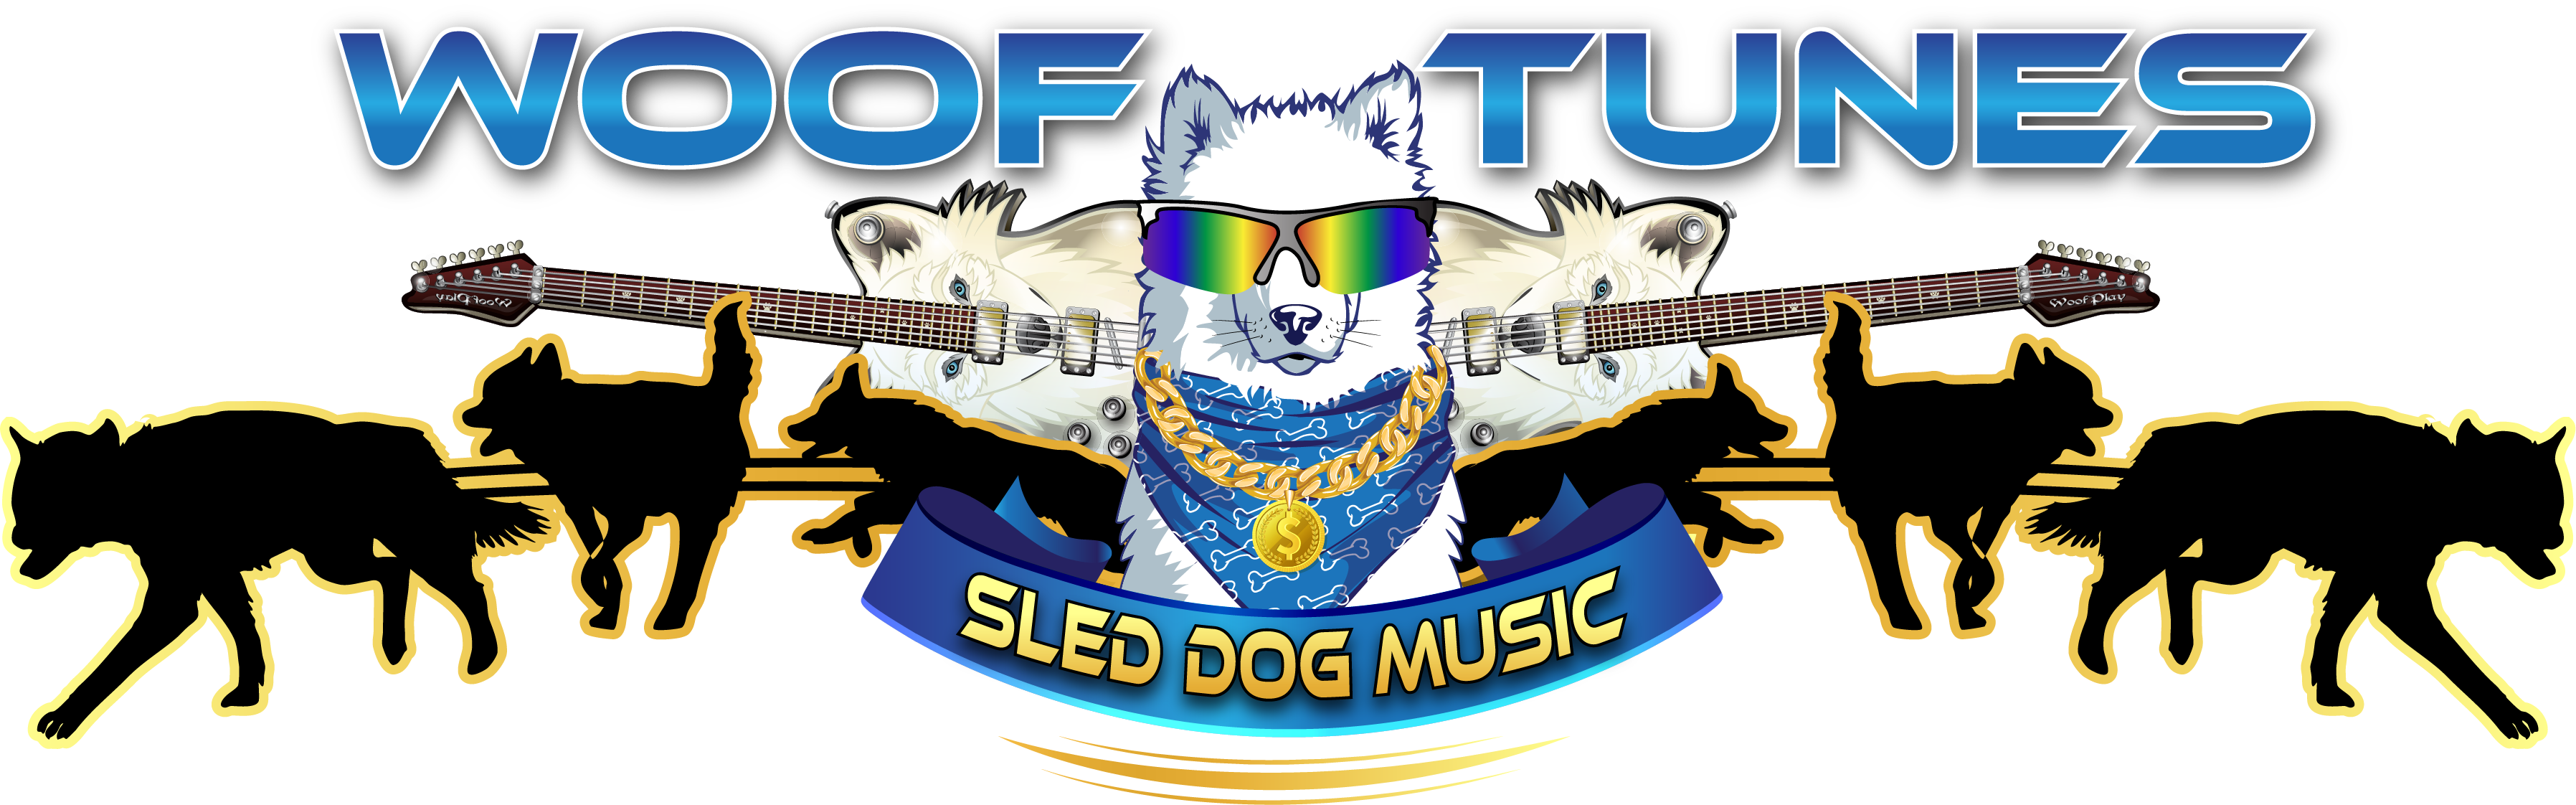 WooFDriver's WooFTunes